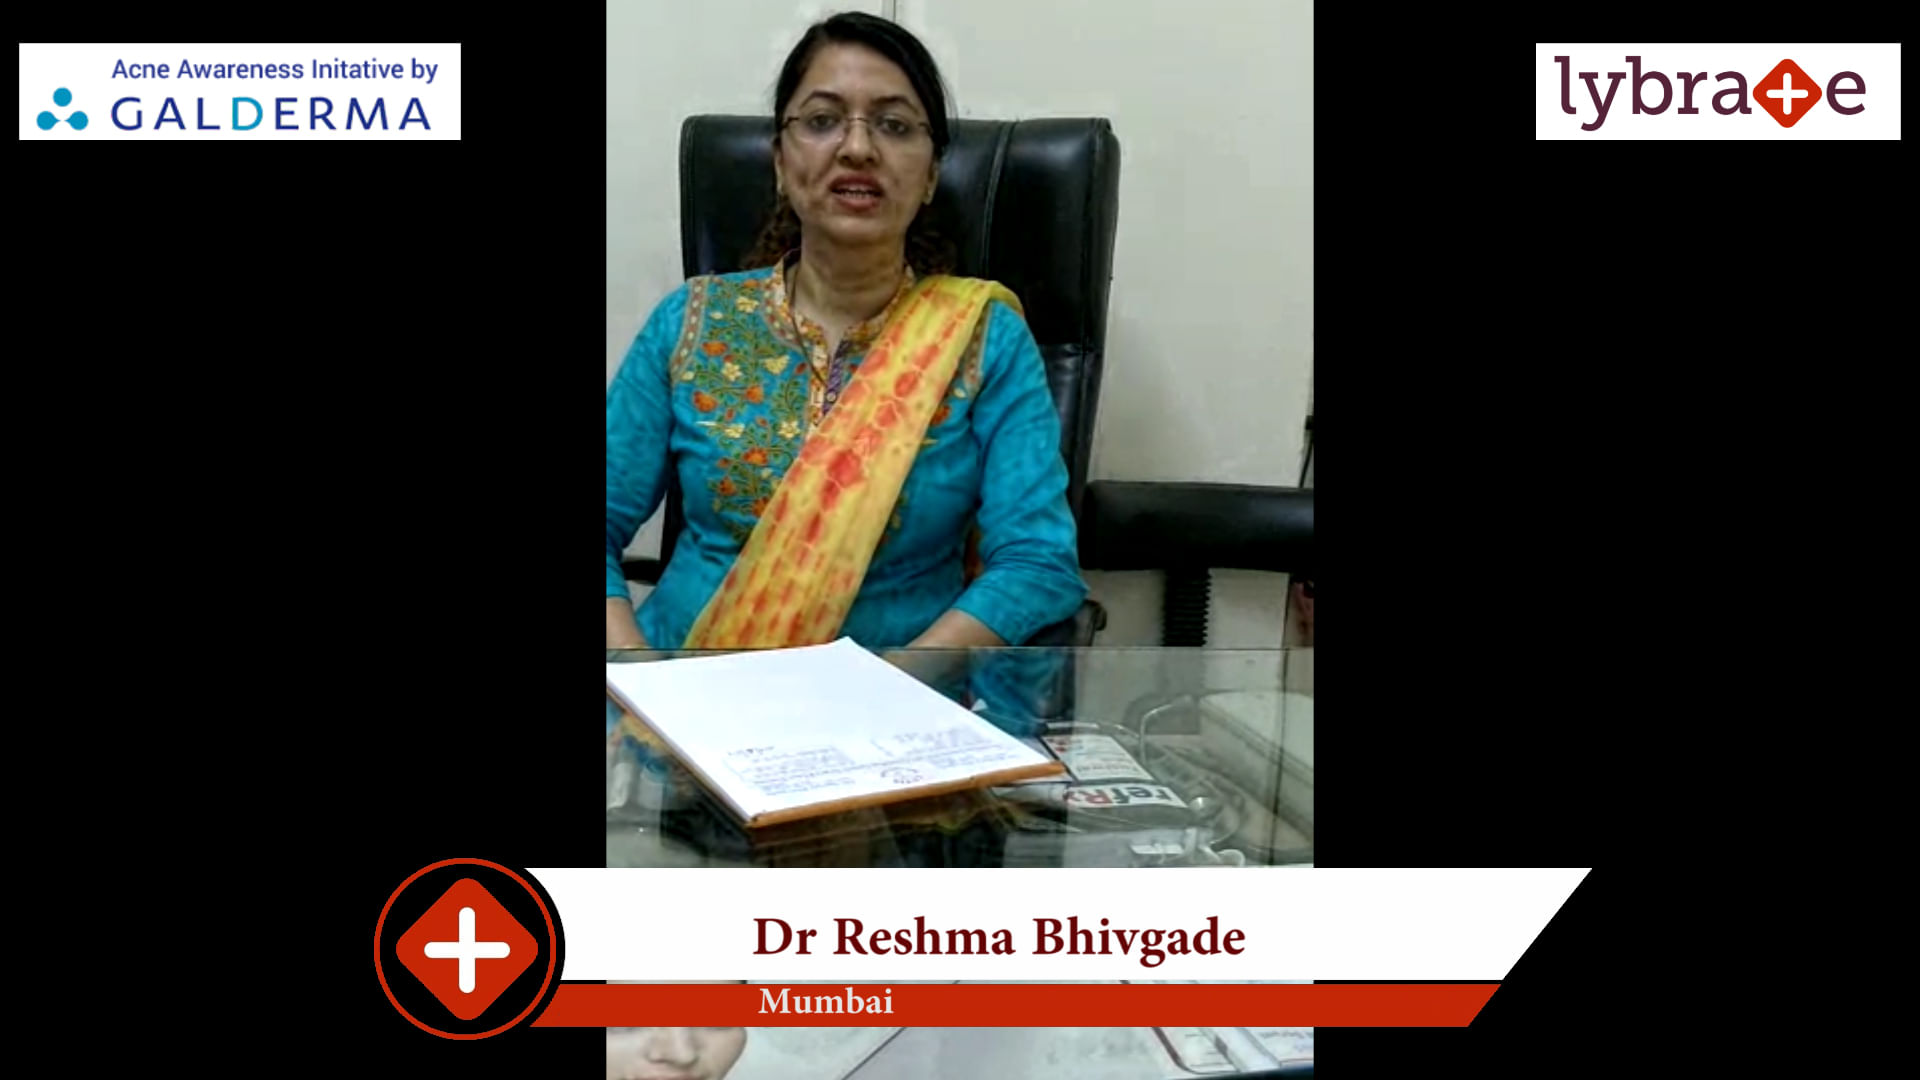 Lybrate | Dr. Reshma Bhivgade speaks on IMPORTANCE OF TREATING ACNE EARLY